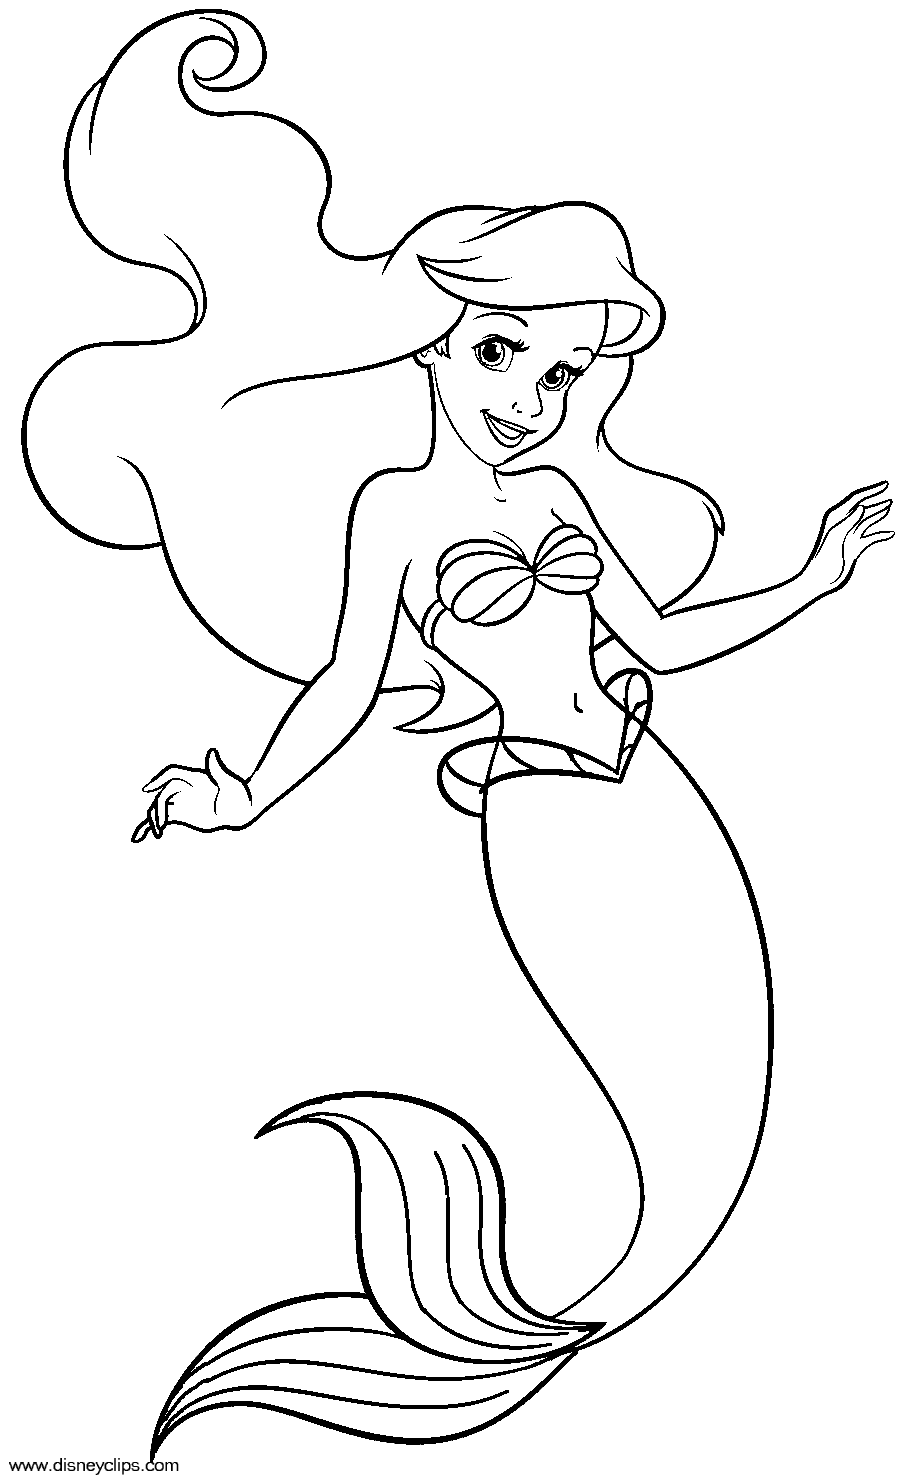 free ariel coloring pages the little mermaid coloring pages to download and print coloring pages free ariel 